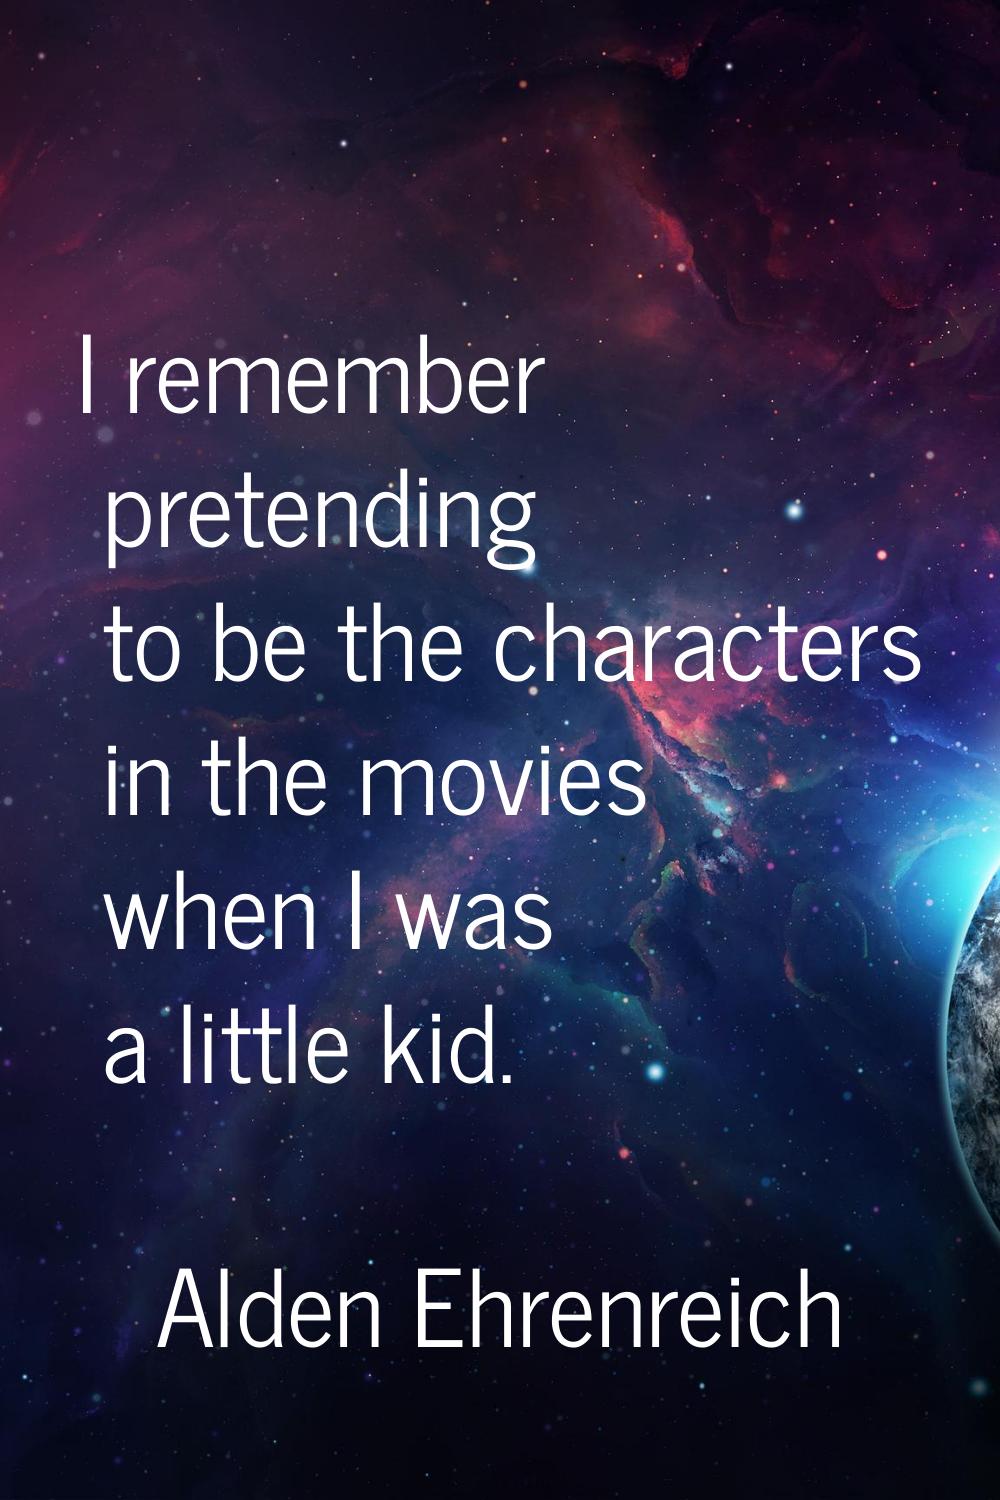 I remember pretending to be the characters in the movies when I was a little kid.